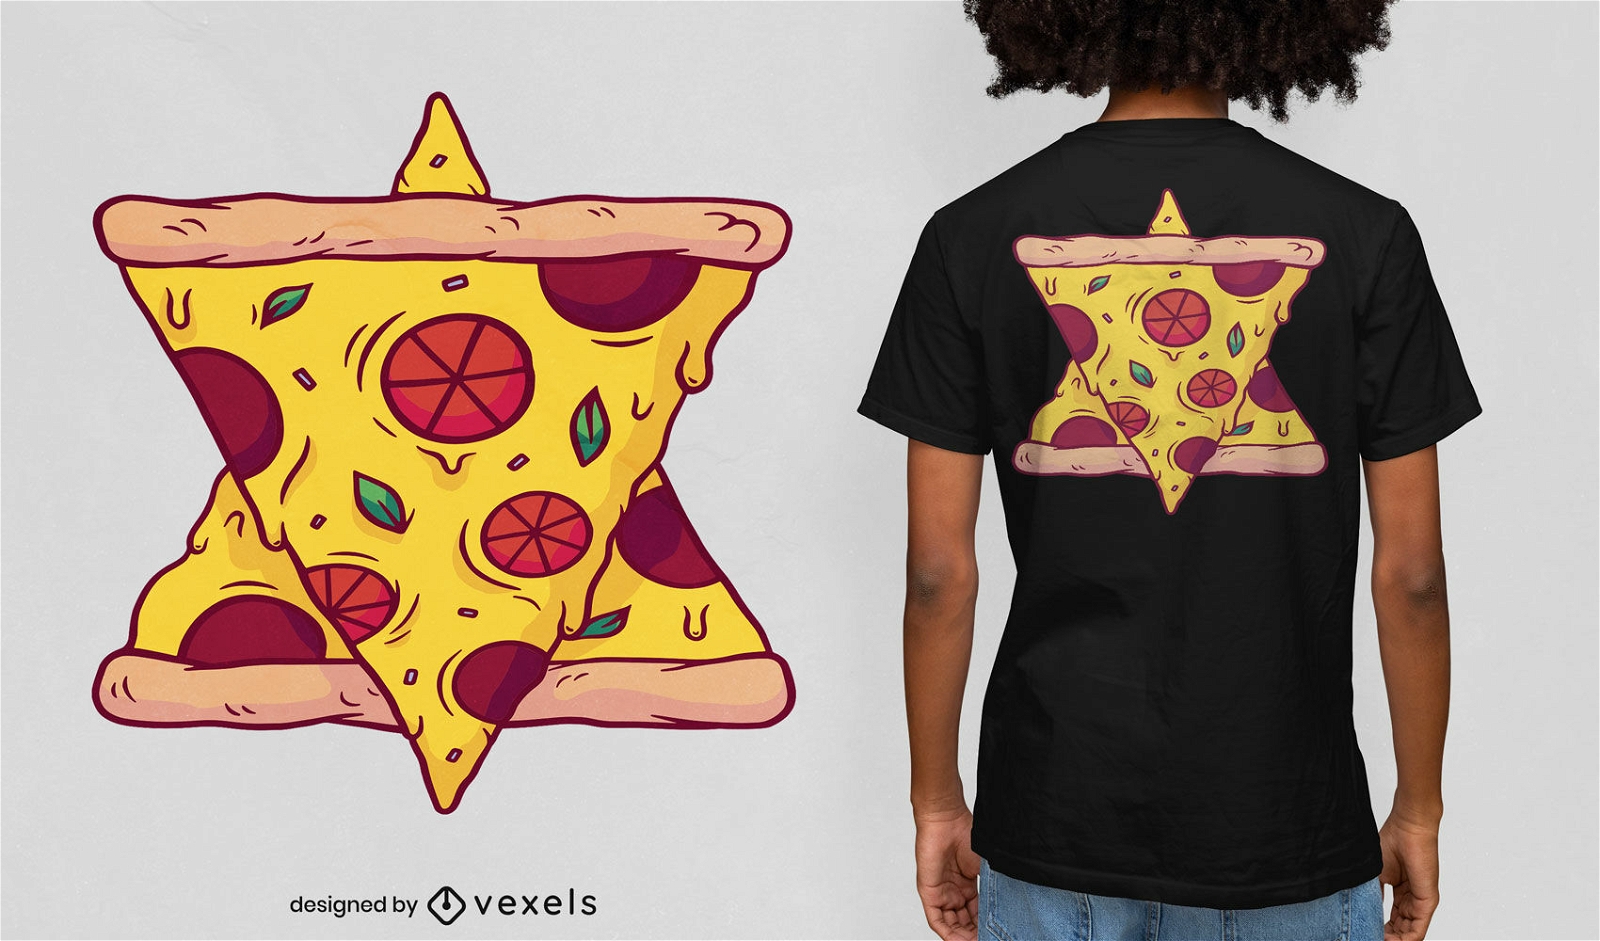 Six pointed pizza star t-shirt design